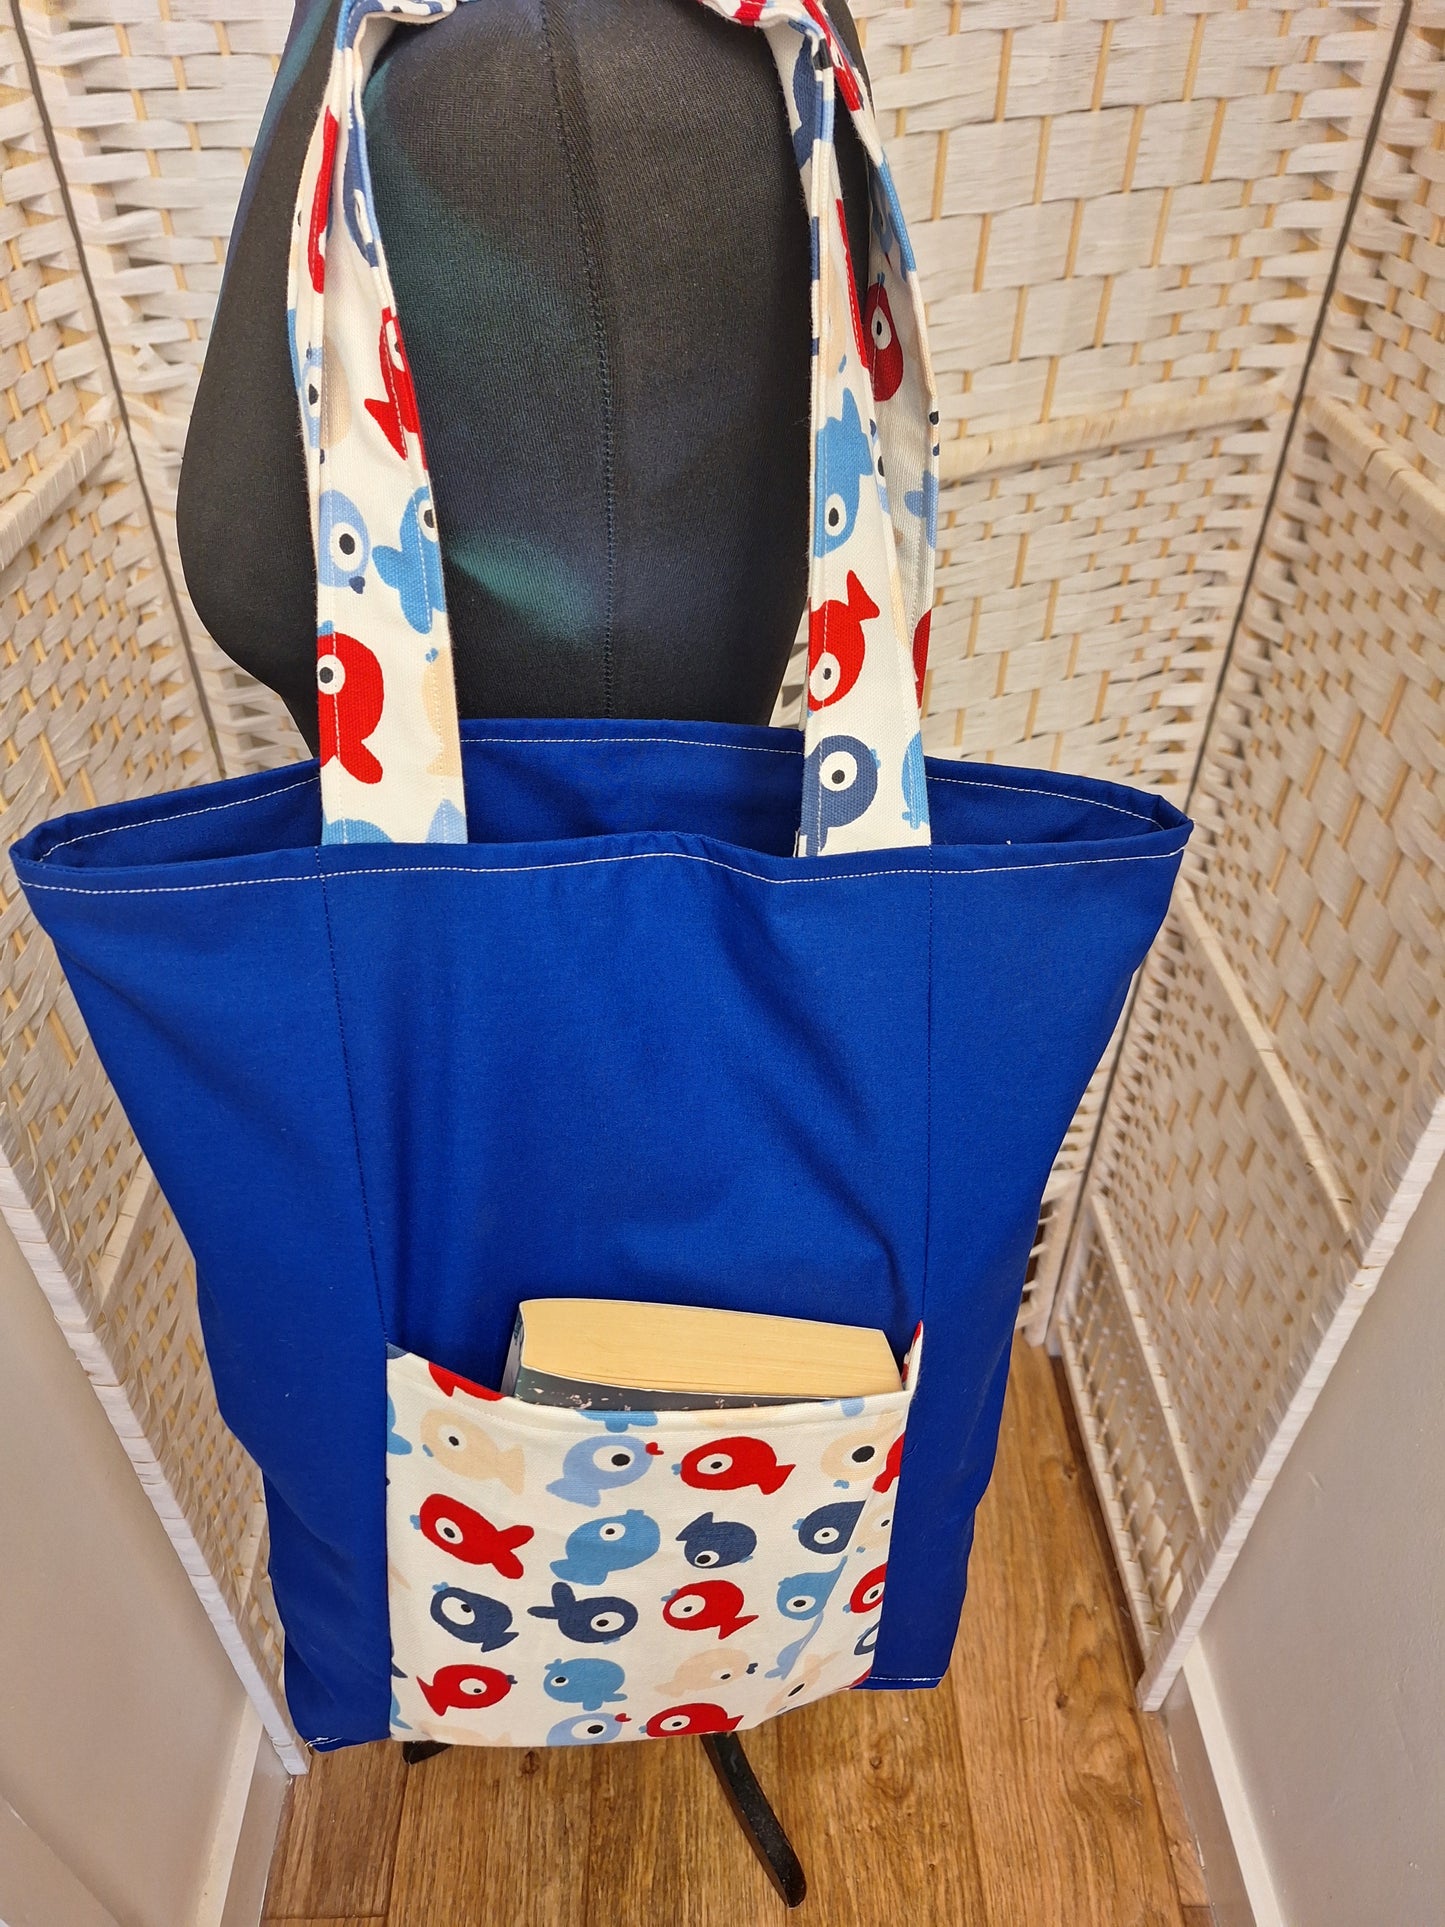 Red and Blue Fish Themed Tote Bag with Outside Pocket, Fully Lined with Shoulder Strap, Everyday Shopping tote Bag, Gift for Fish Lovers.